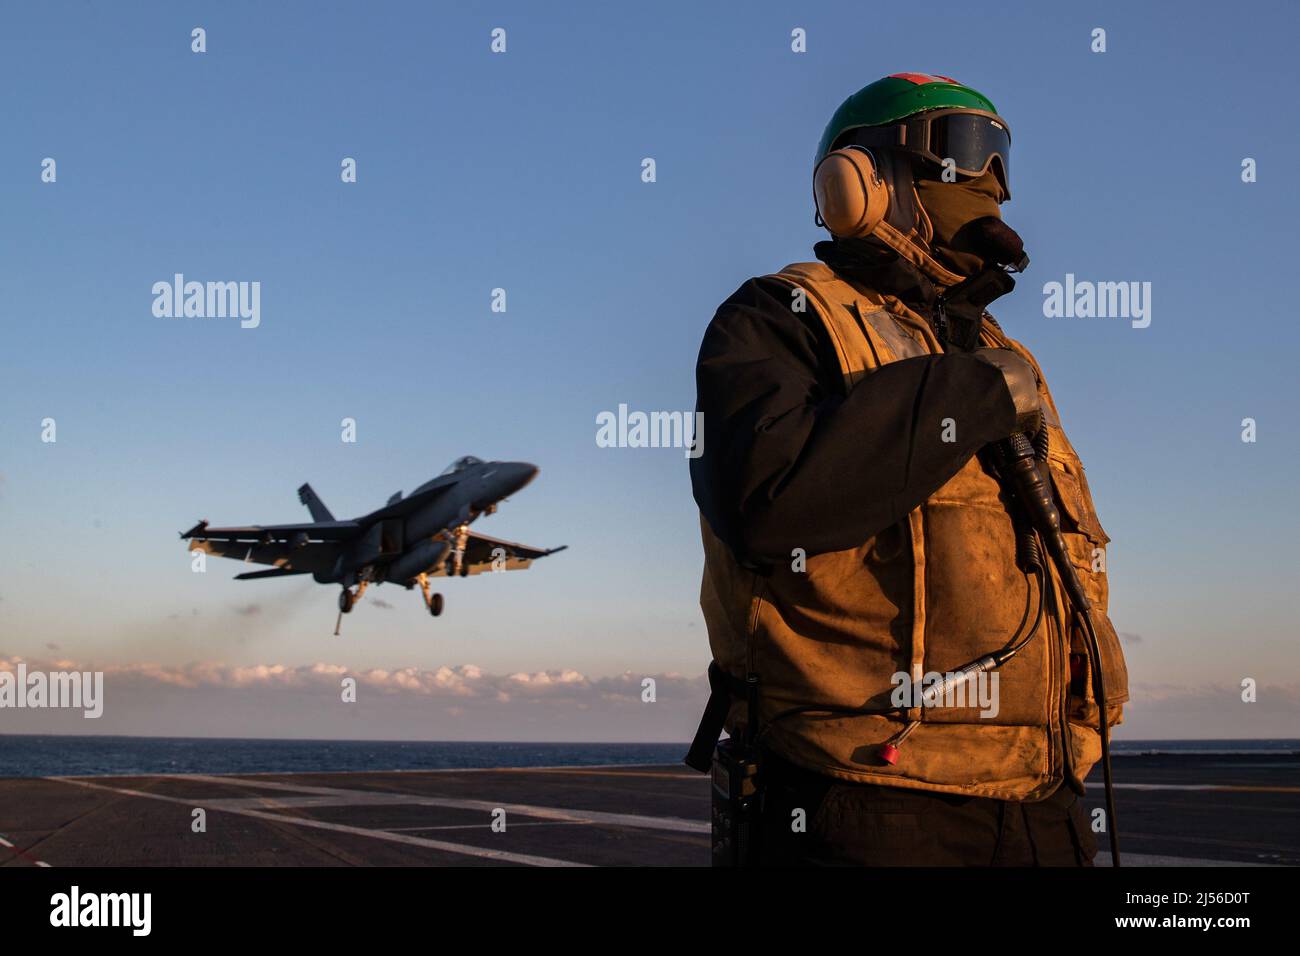 Aviation Boatswain's Mate (Equipment) 1st Class Aaron Wilson, from Atlanta, assigned to USS Gerald R. Ford’s (CVN 78) air department, stands watch as the arresting gear officer as an F/A-18E Super Hornet, attached to the 'Golden Warriors' of Strike Fighter Squadron (VFA) 87, prepares to land on the flight deck, April 19, 2022. Ford is underway in the Atlantic Ocean conducting carrier qualifications and strike group integration as part of the ship’s tailored basic phase prior to operational deployment. (U.S. Navy photo by Mass Communication Specialist 2nd Class Zachary Melvin) Stock Photo